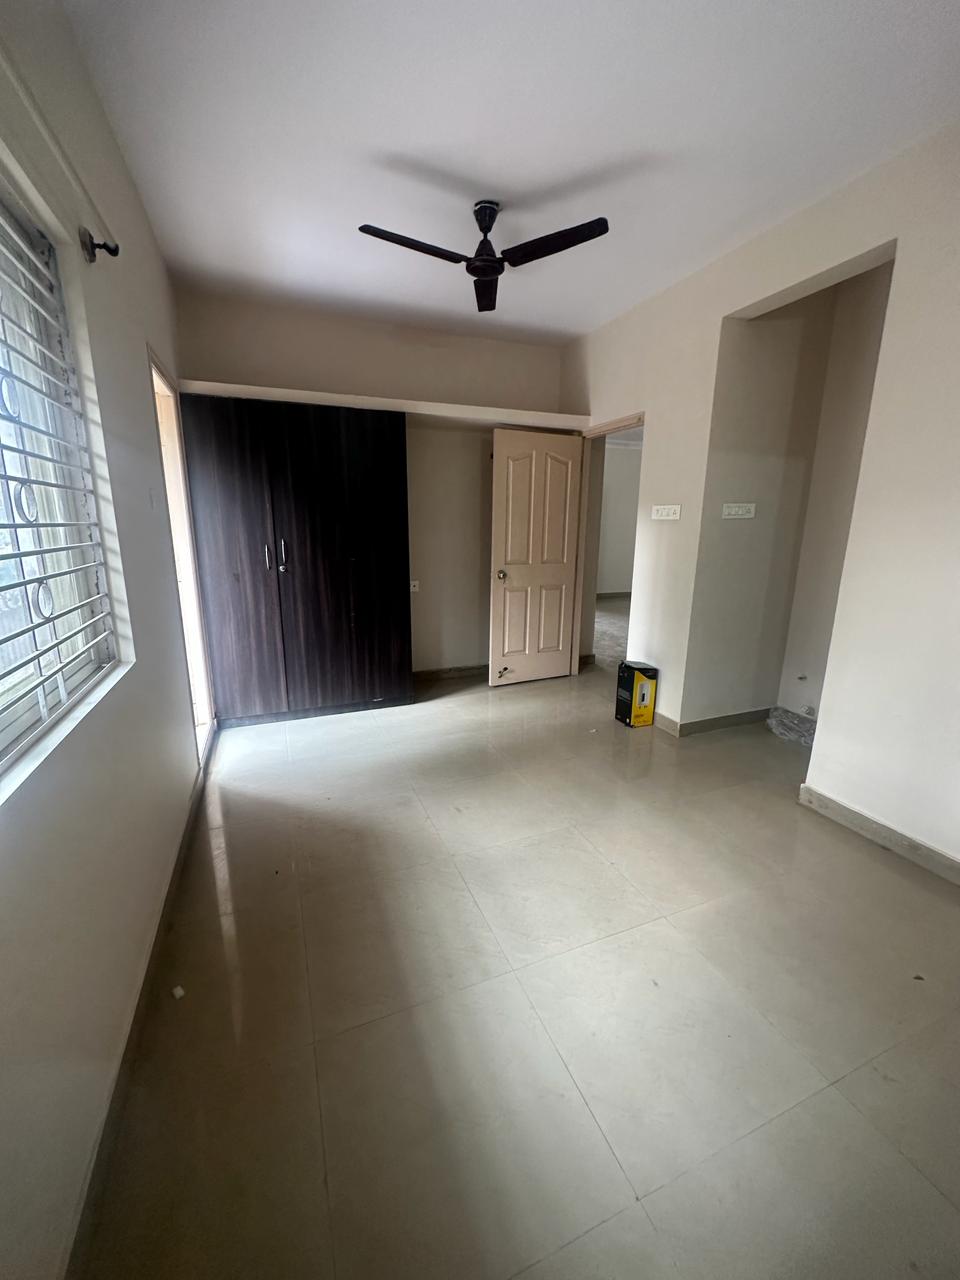 3 BHK Independent House for Lease Only at JAML2 - 4456 in Mahalakshmipuram